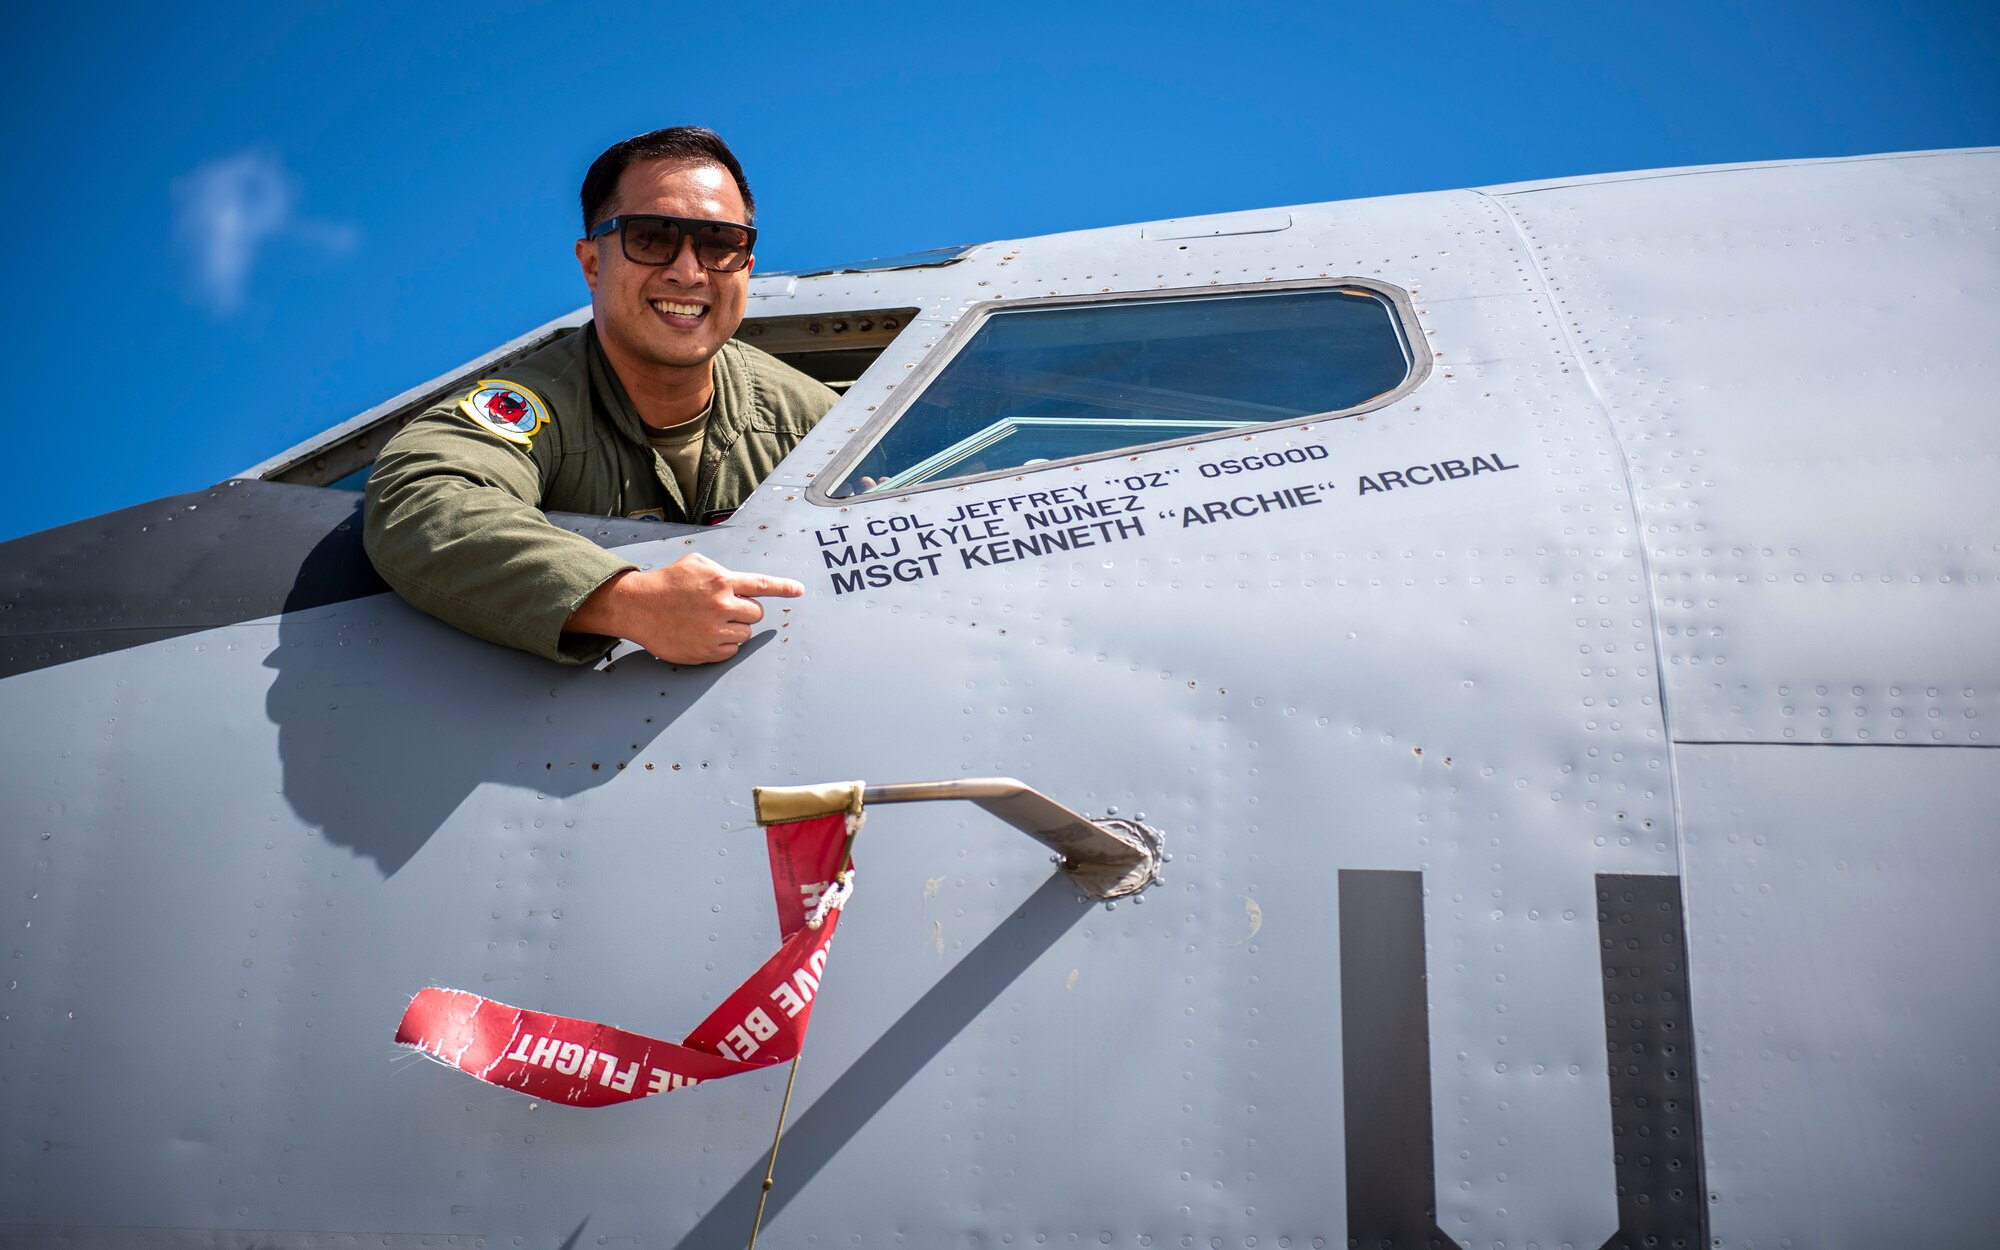 U.S. Air Force Master Sgt. Kenneth Arcibal, a boom operator assigned to the 50th Air Refueling Squadron, points to his name on a KC-135 Stratotanker at MacDill Air Force Base, Florida, June 1, 2022. The aircraft was retired and flown to Sheppard AFB, Texas, to be used as a training tool for future maintainers. (U.S. Air Force photo by Airman 1st Class Lauren Cobin)